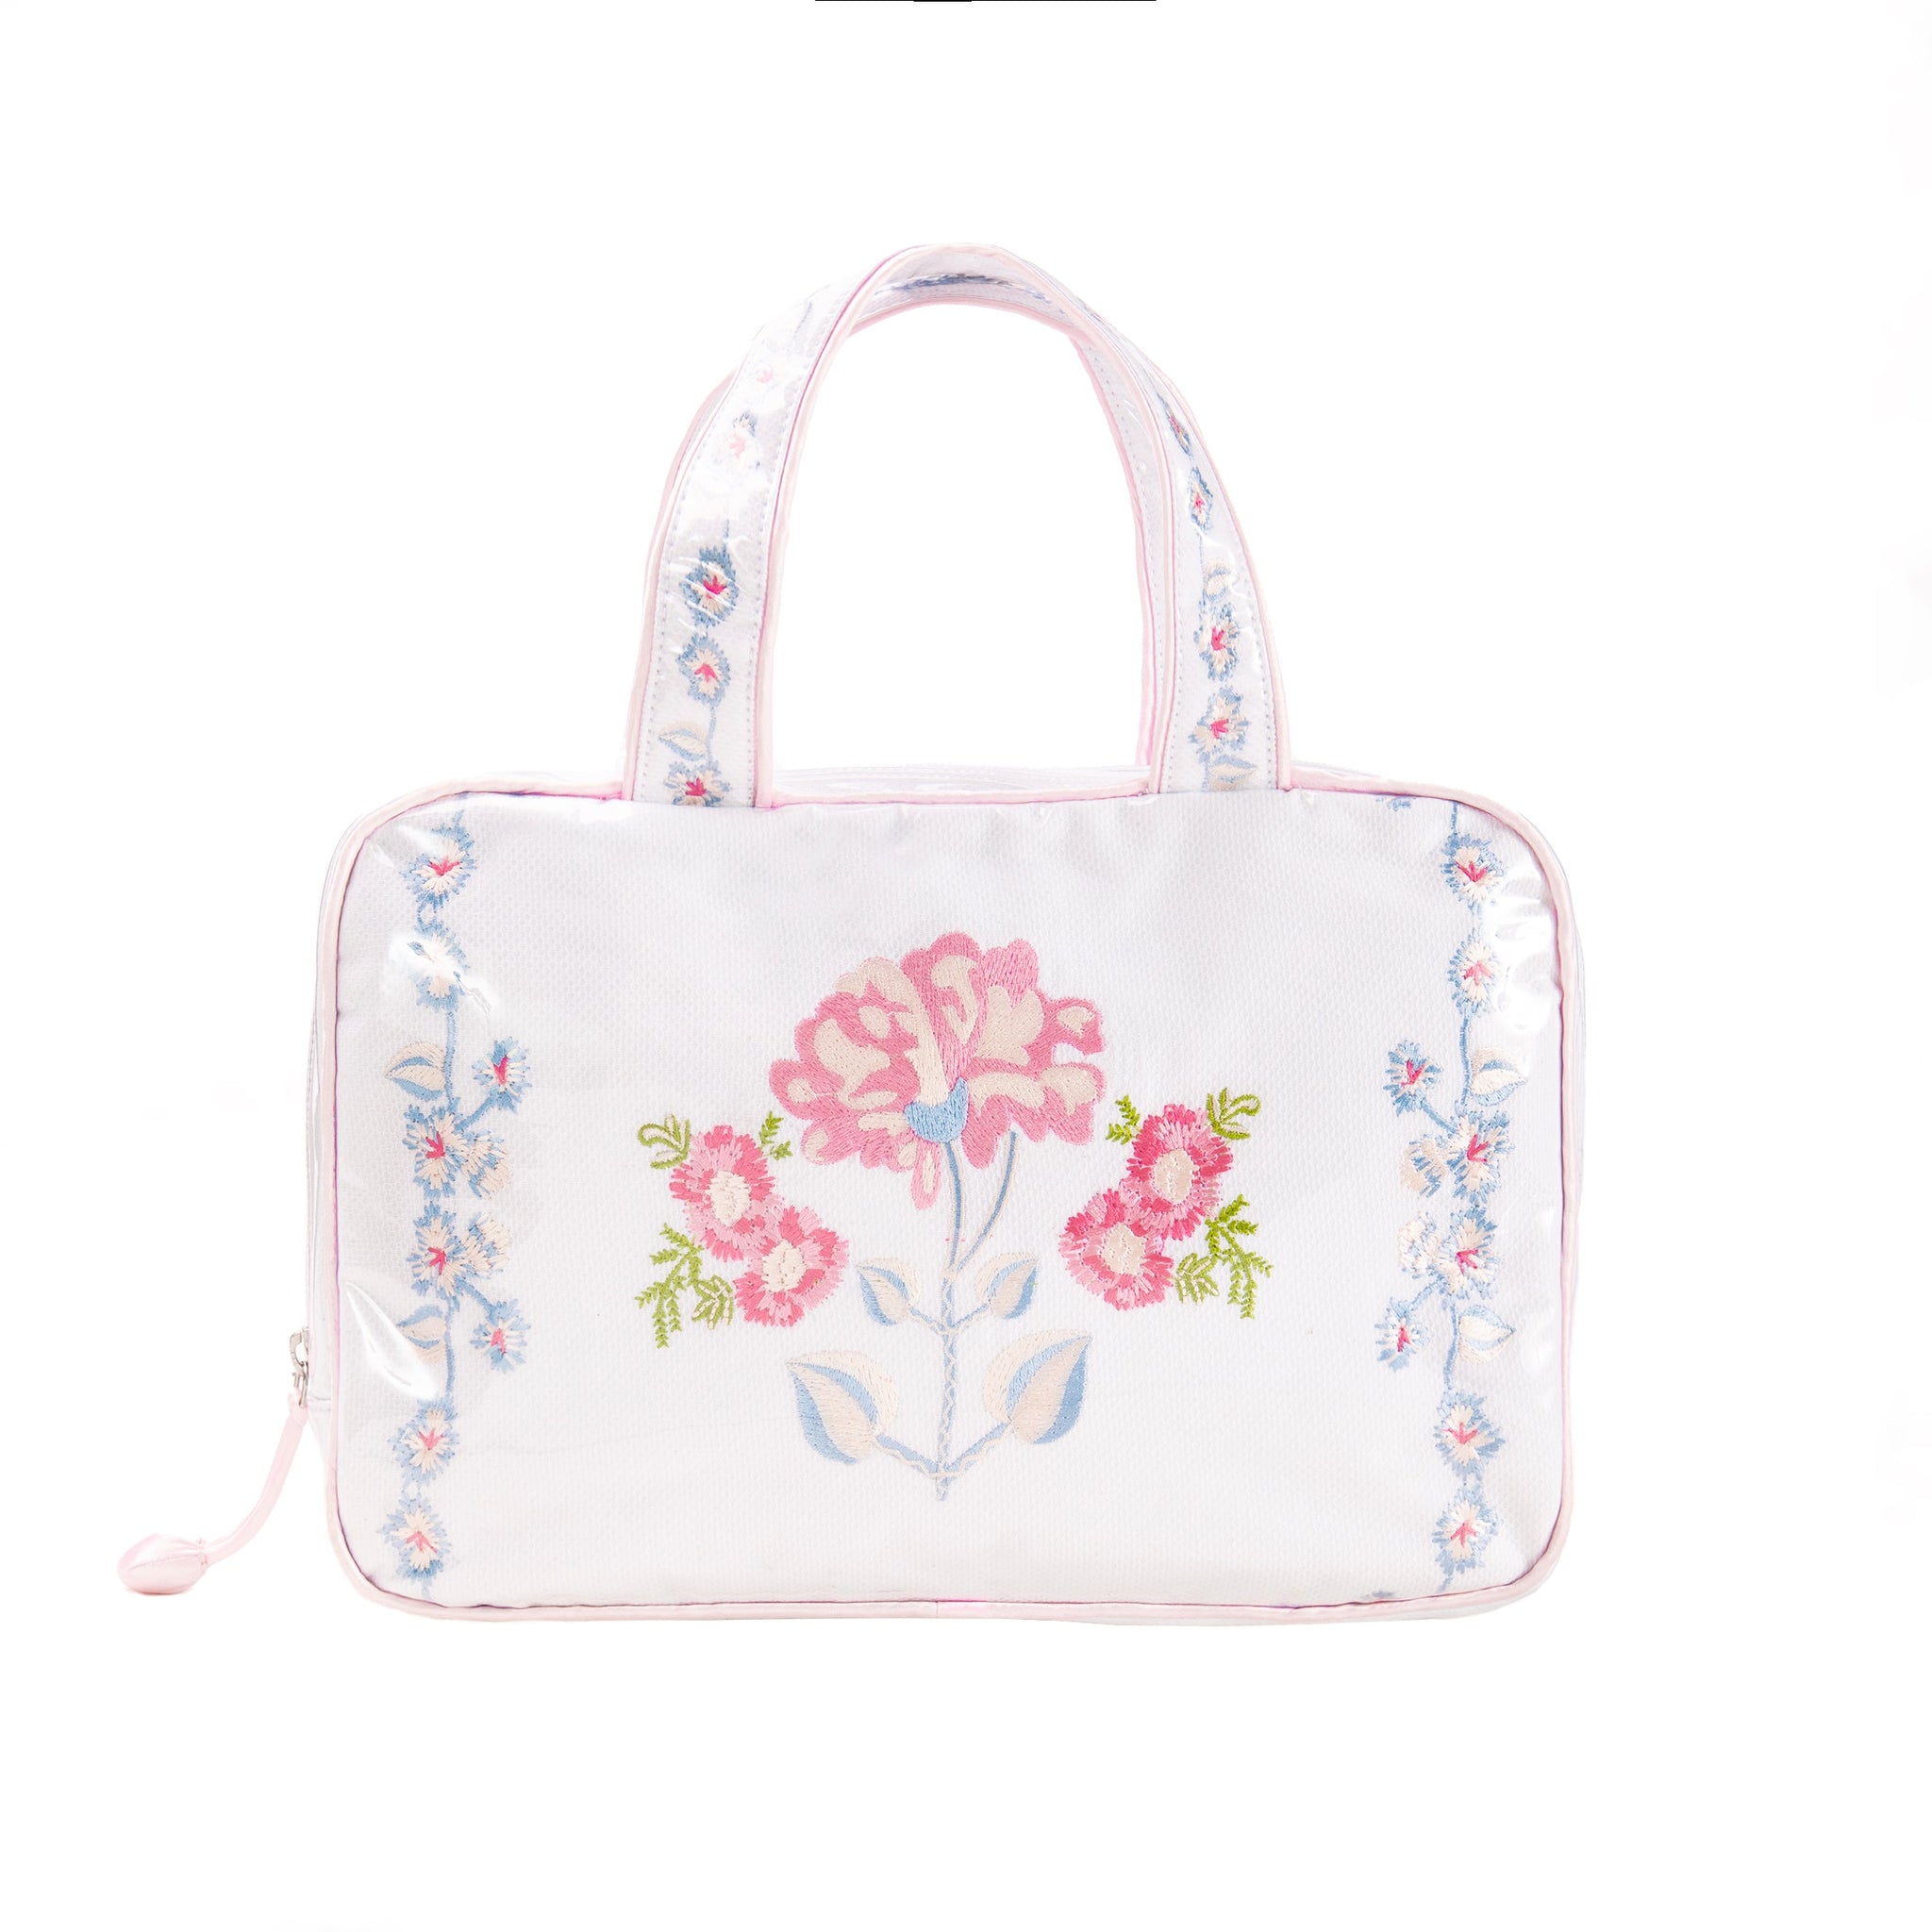 Embroidered Double Handle Cosmetic Bag